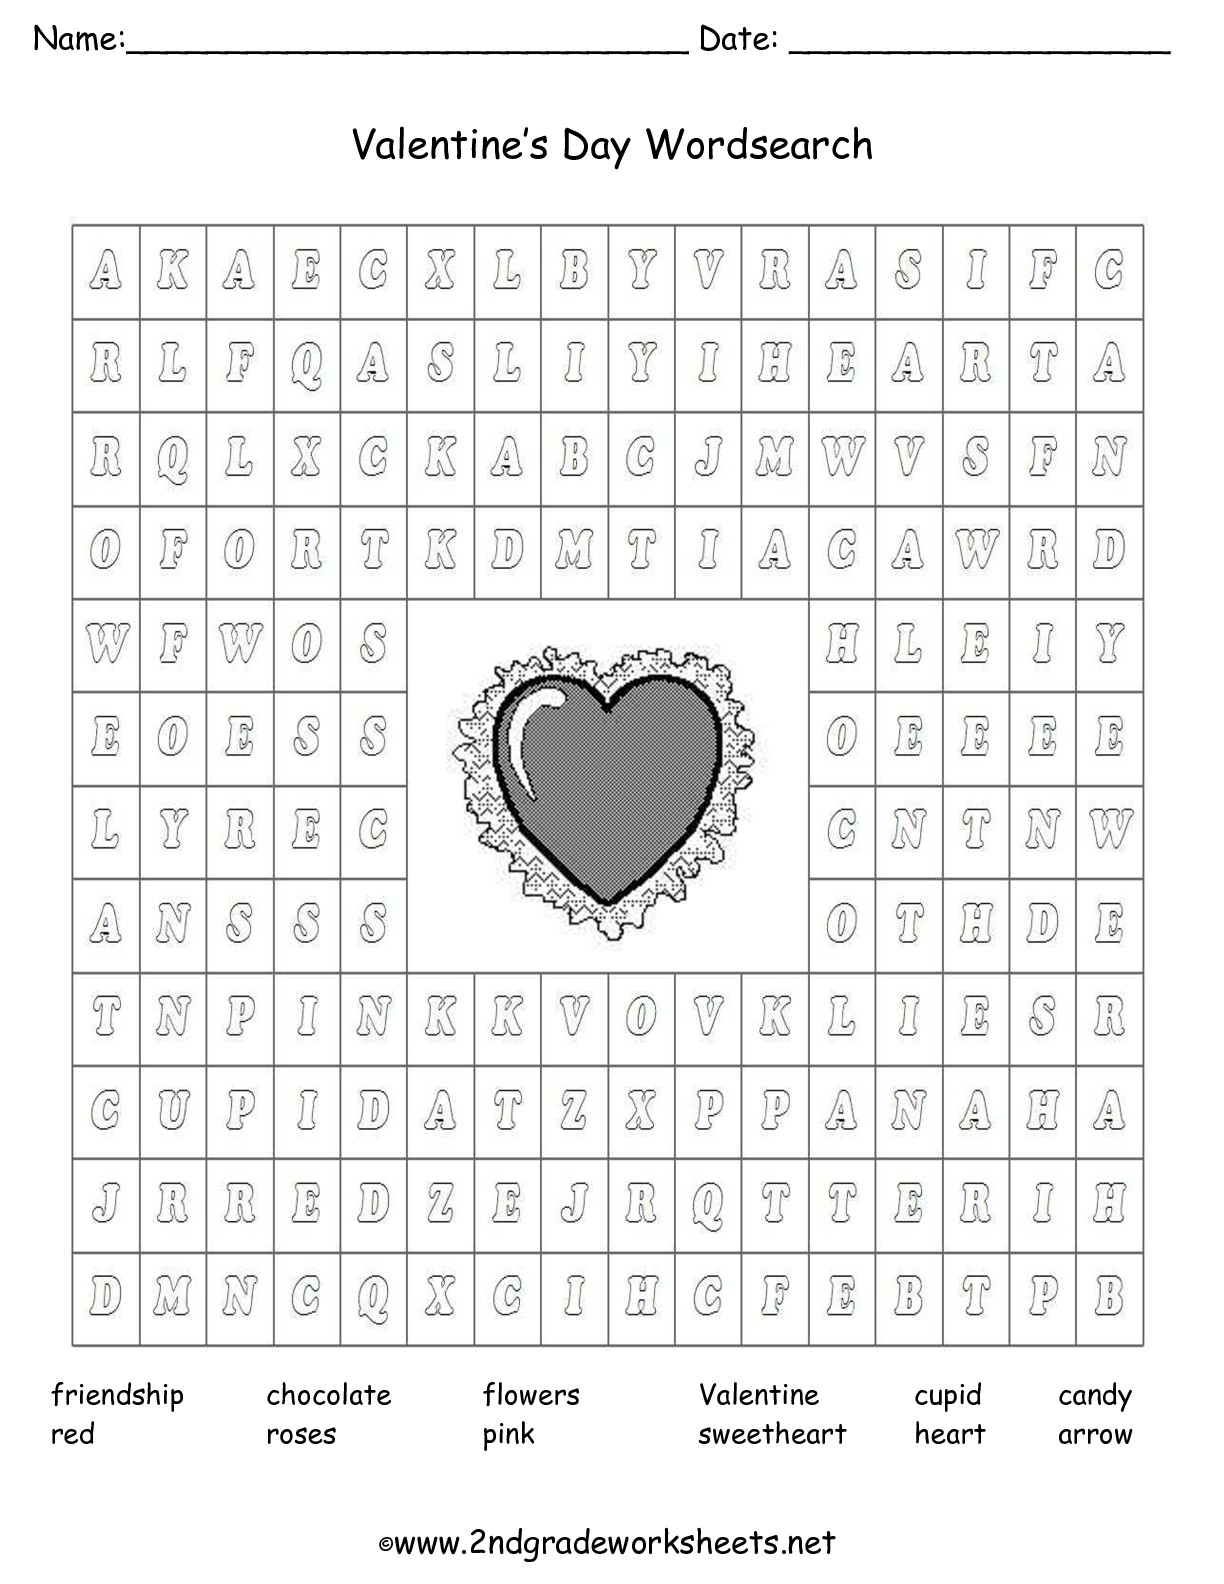 hot-free-valentine-s-day-worksheets